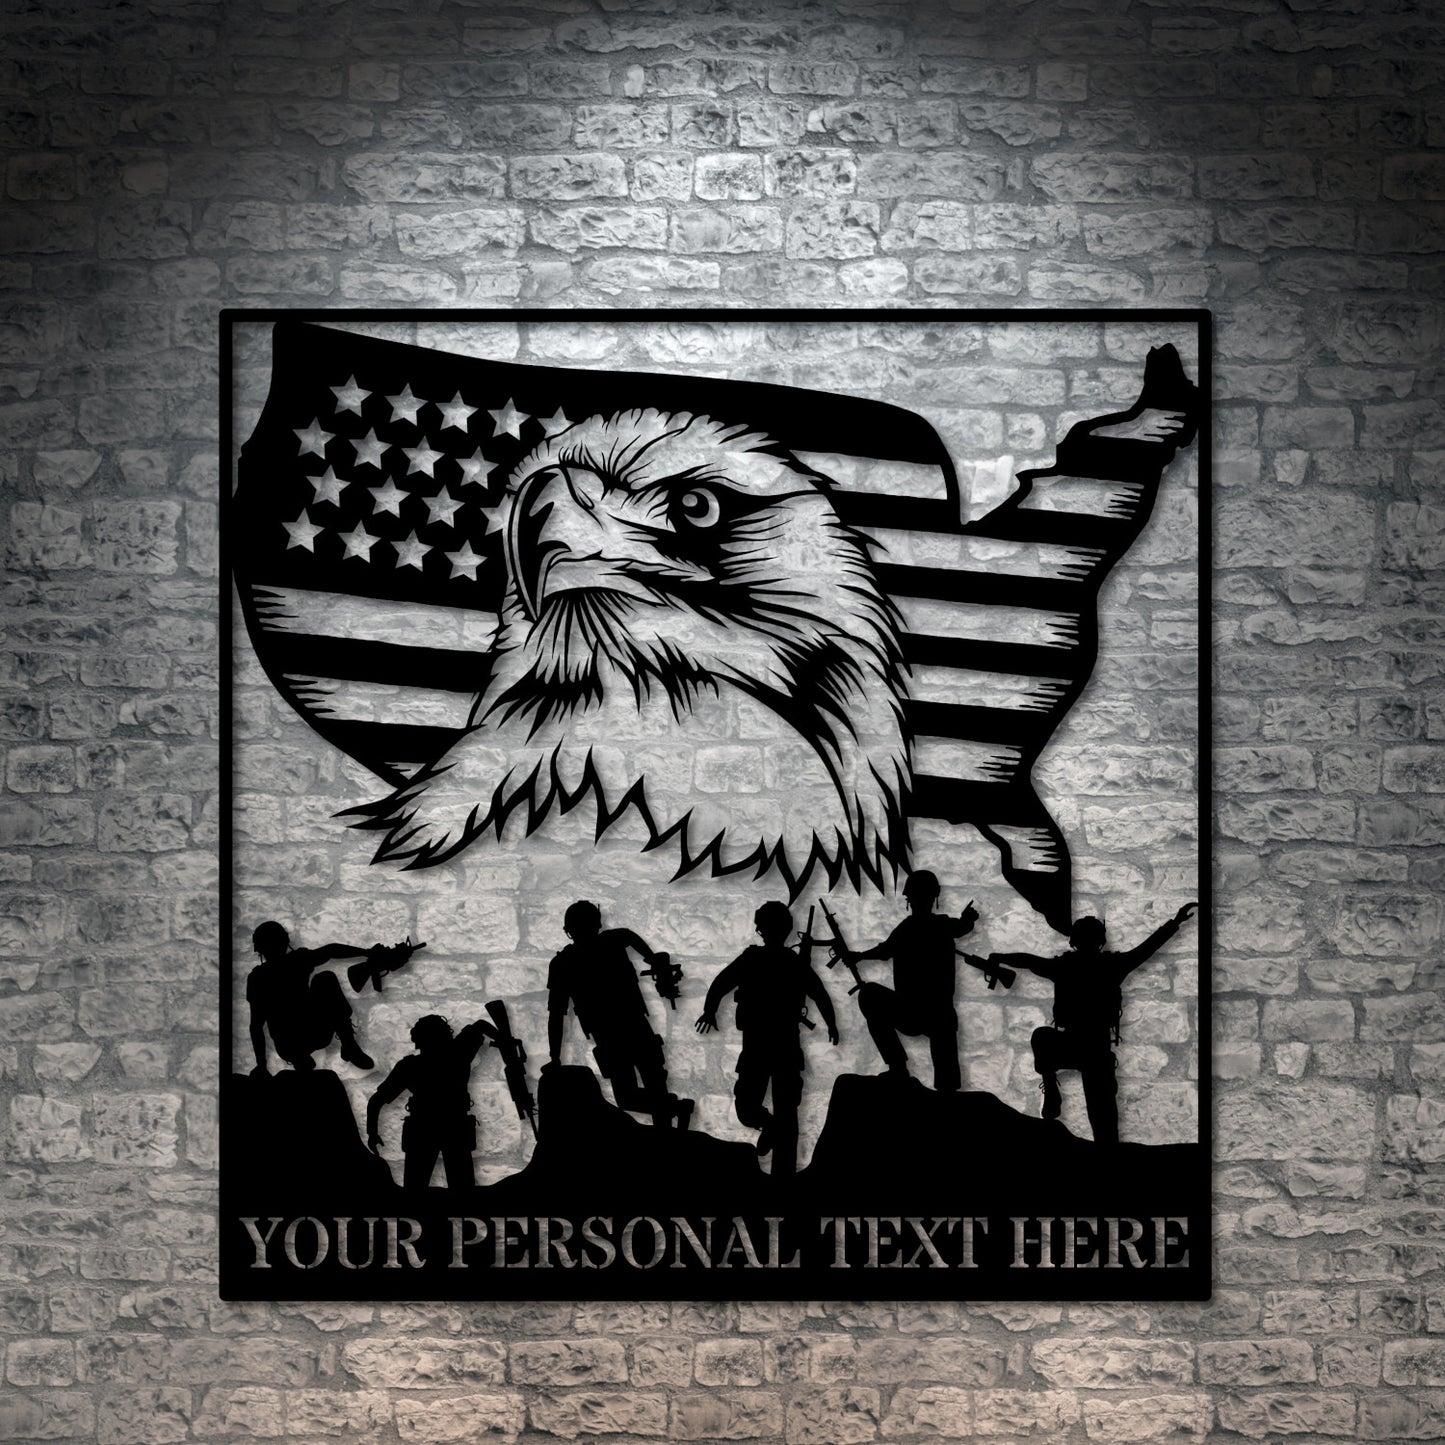 Personalized Military Team Metal Sign Gift. US Veteran Monogram. US Soldier Wall Hanging. Patriotic Eagle Wall Art. Custom Army Plaque Decor